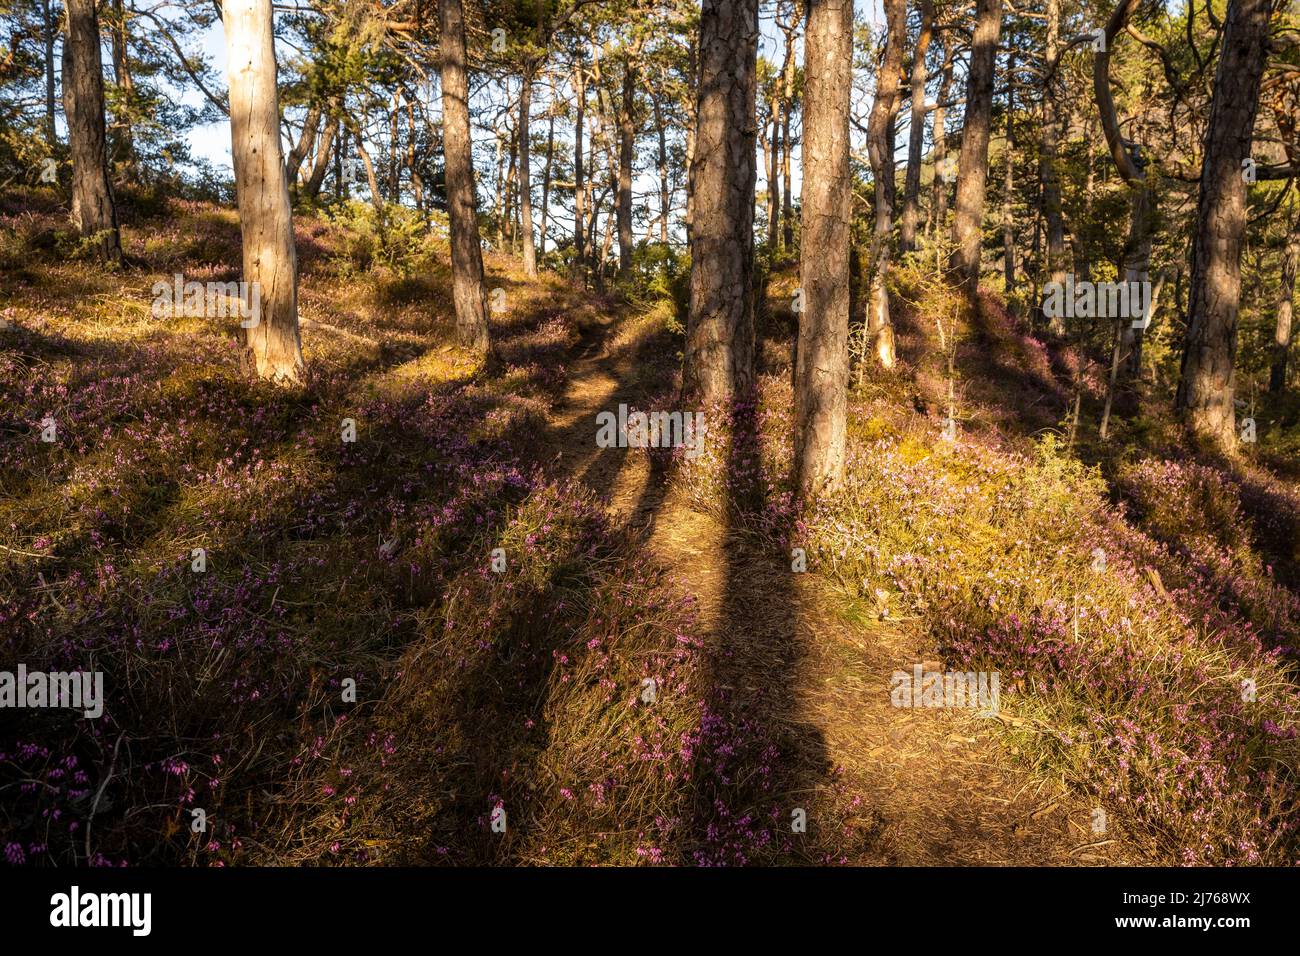 Small forest path in the golden evening light of the sun, surrounded by flowering heather and pines, with hard shadows of the trees. Stock Photo